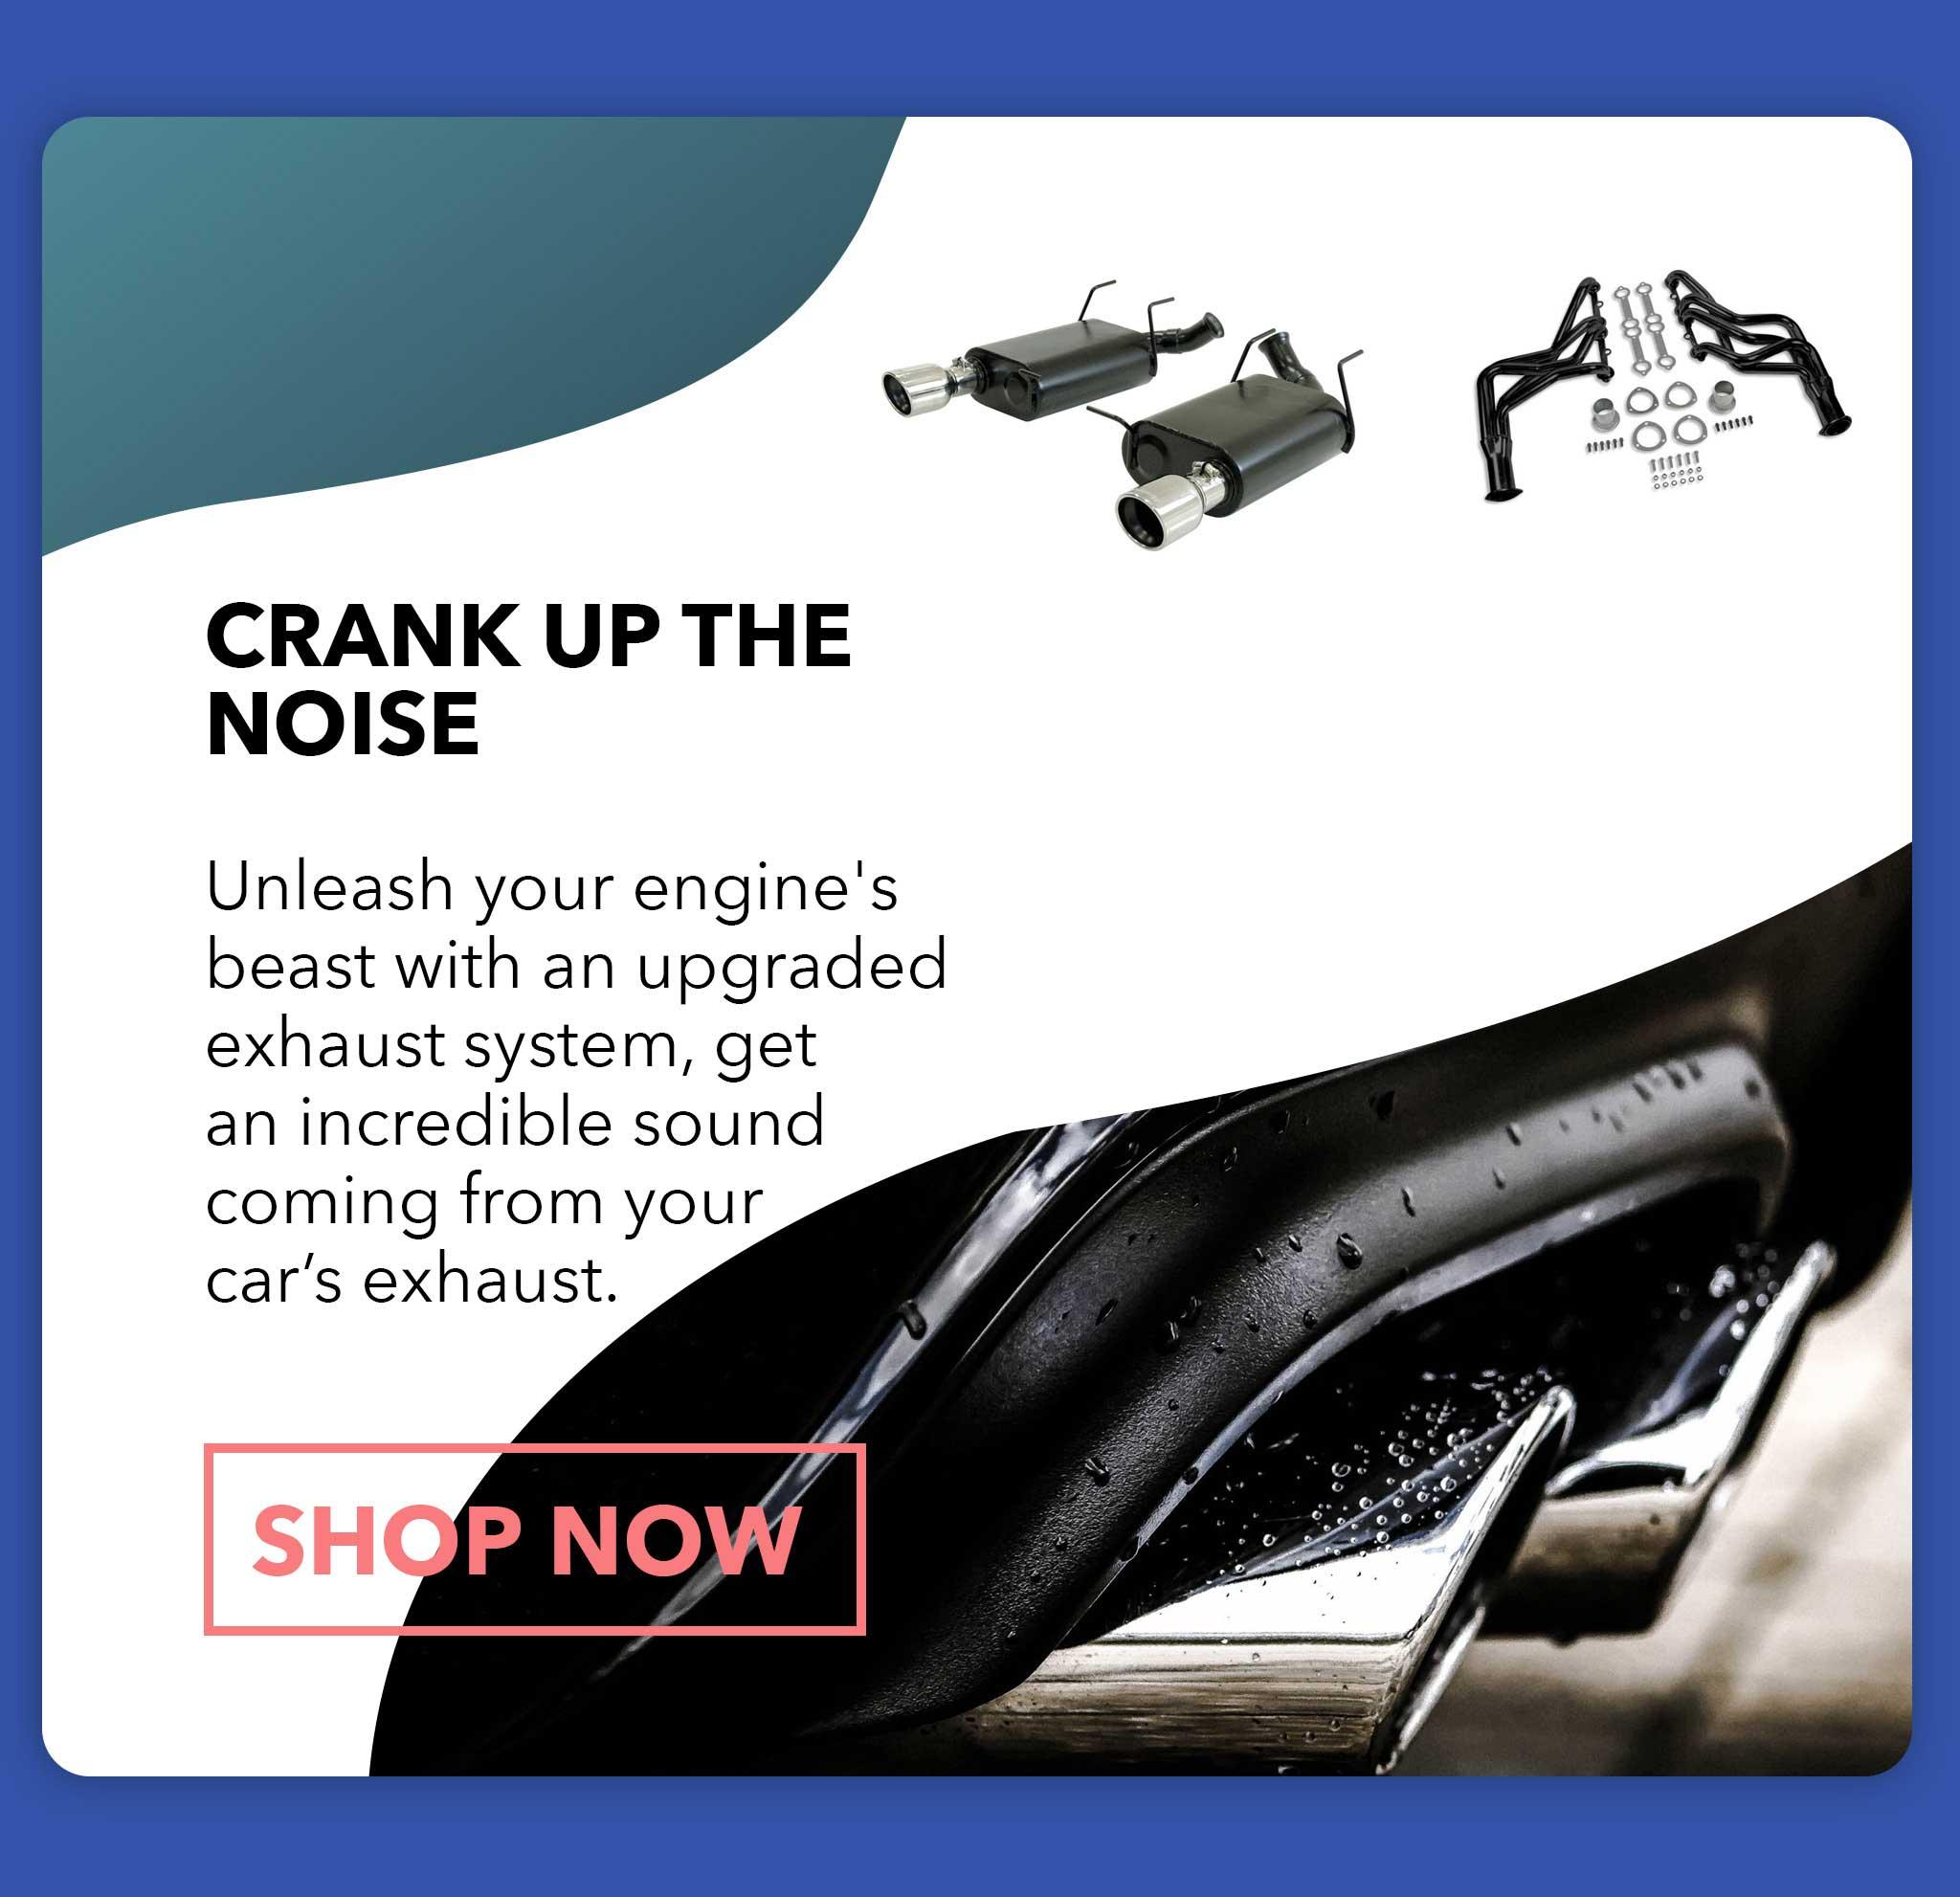 Unleash your engine's beast with an upgraded exhaust system, get an incredible sound coming from your cars exhaust.